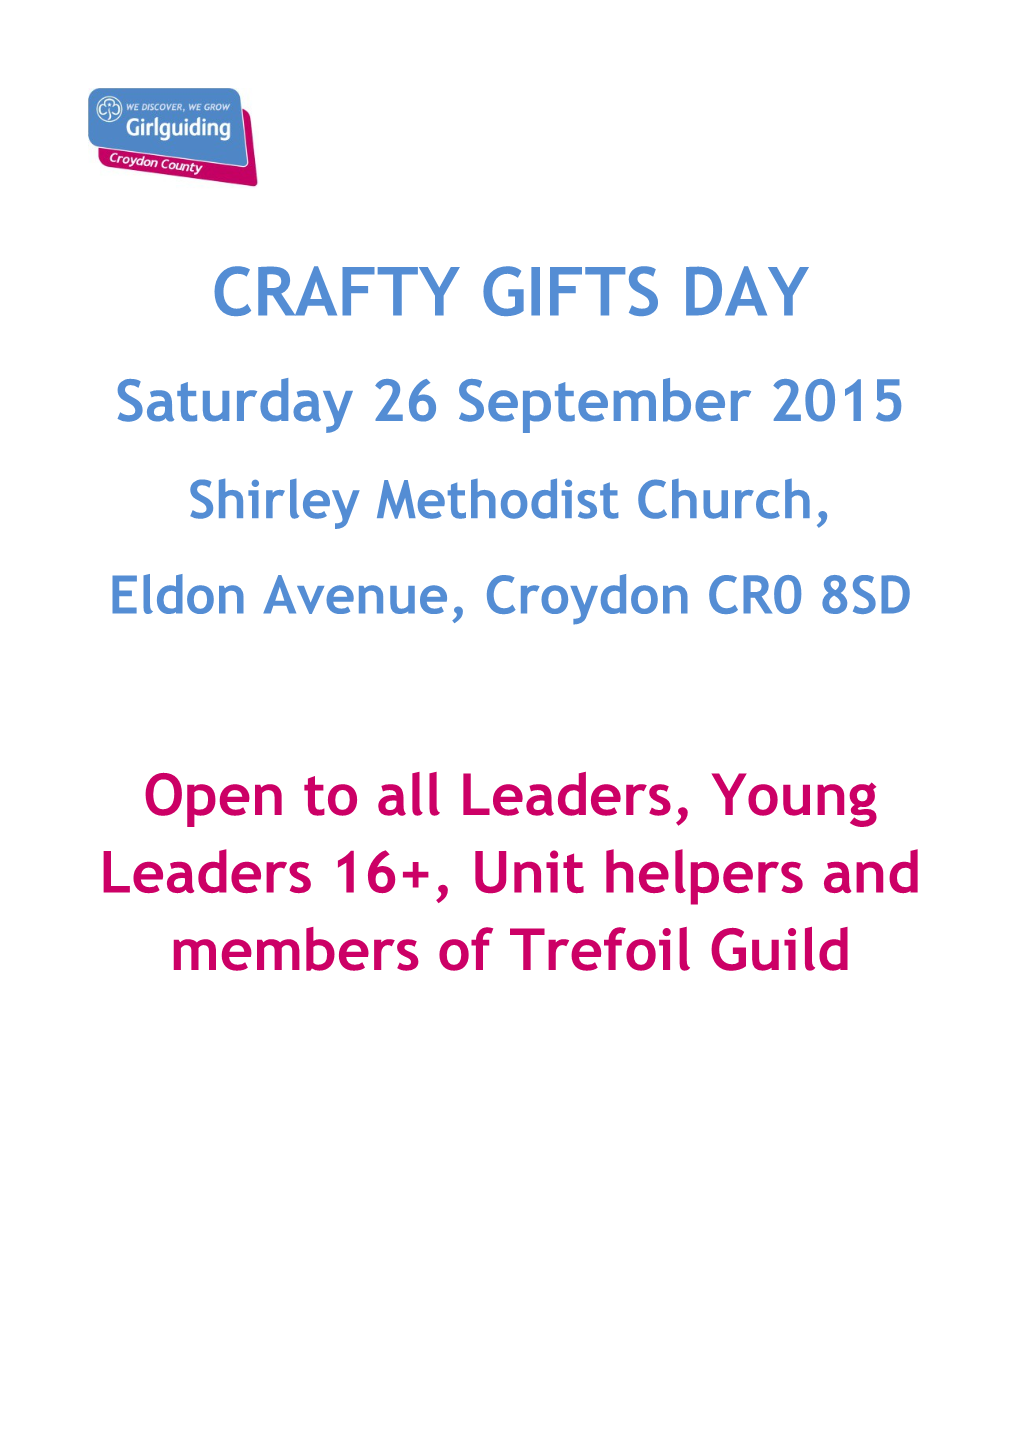 Open to All Leaders, Young Leaders 16+, Unit Helpers and Members of Trefoil Guild